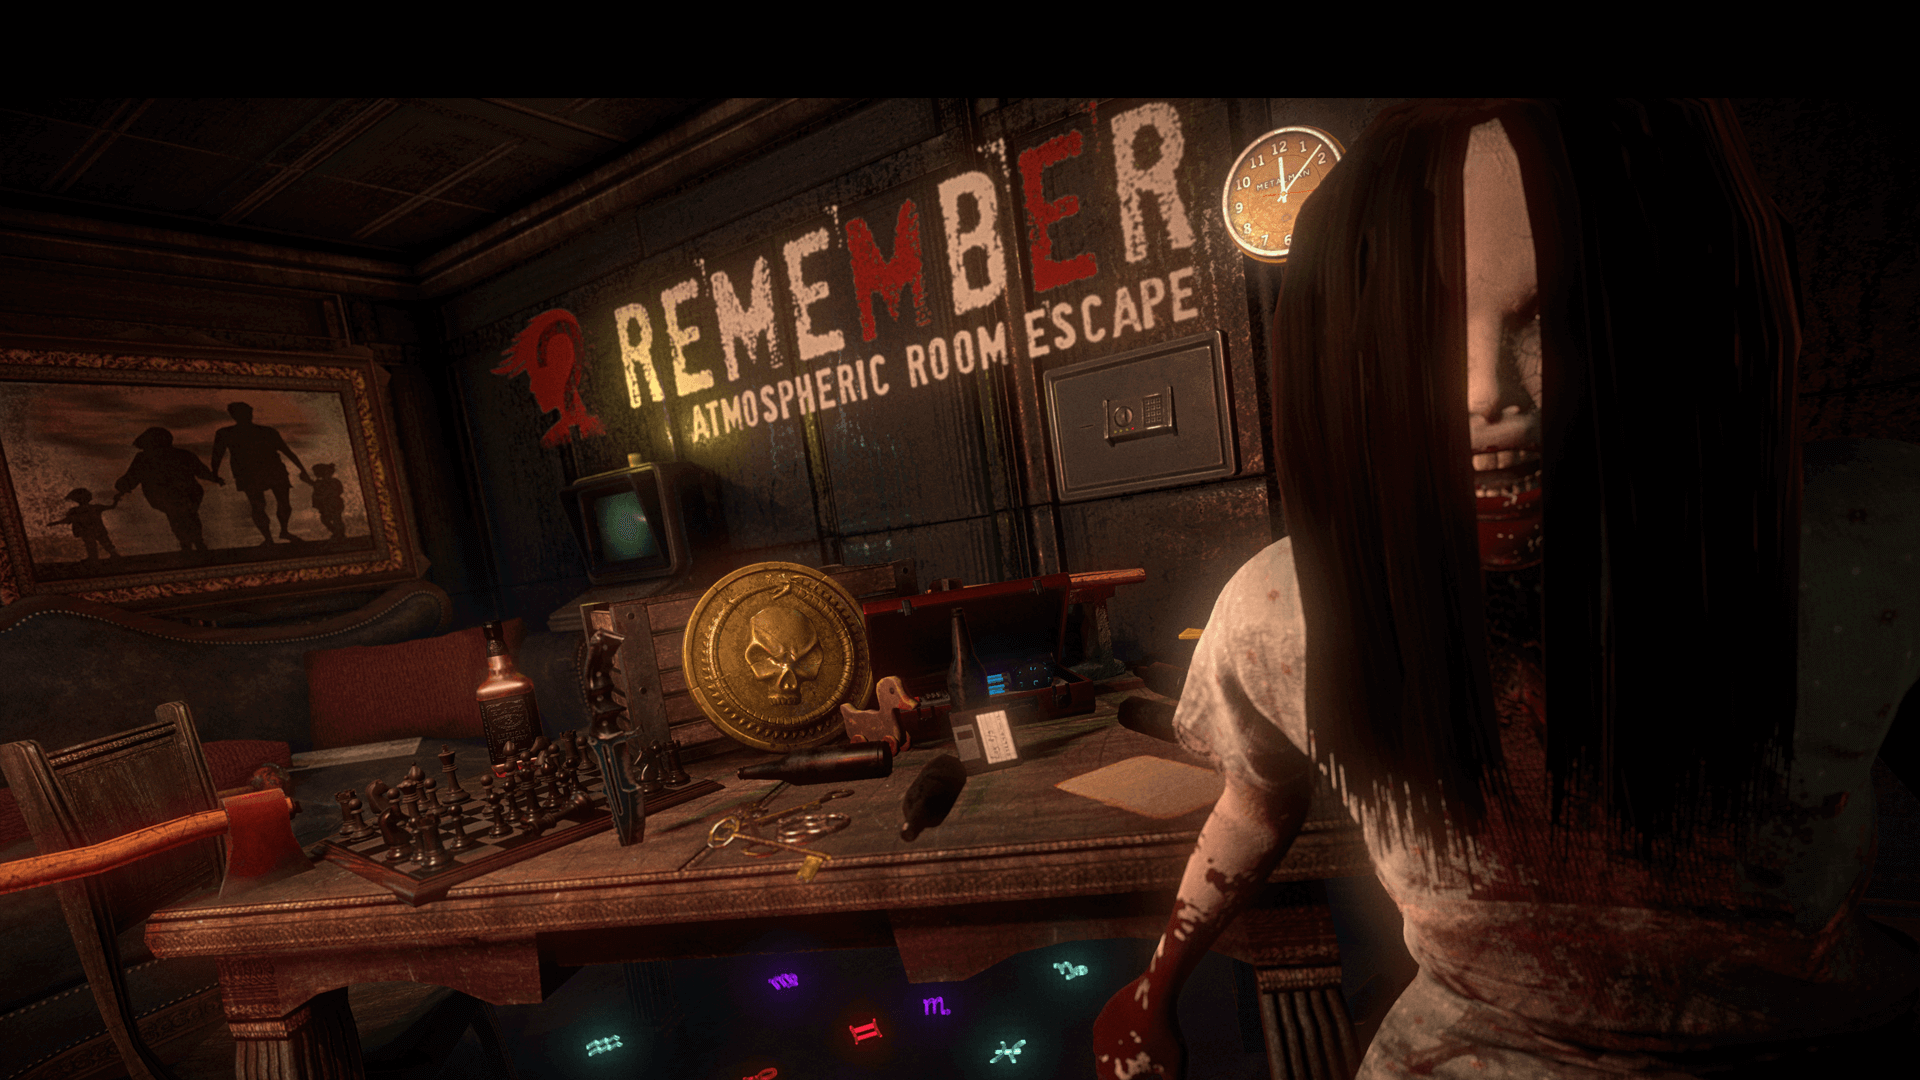 Remember: A Horror Adventure Puzzle Game LITE para Android - Download